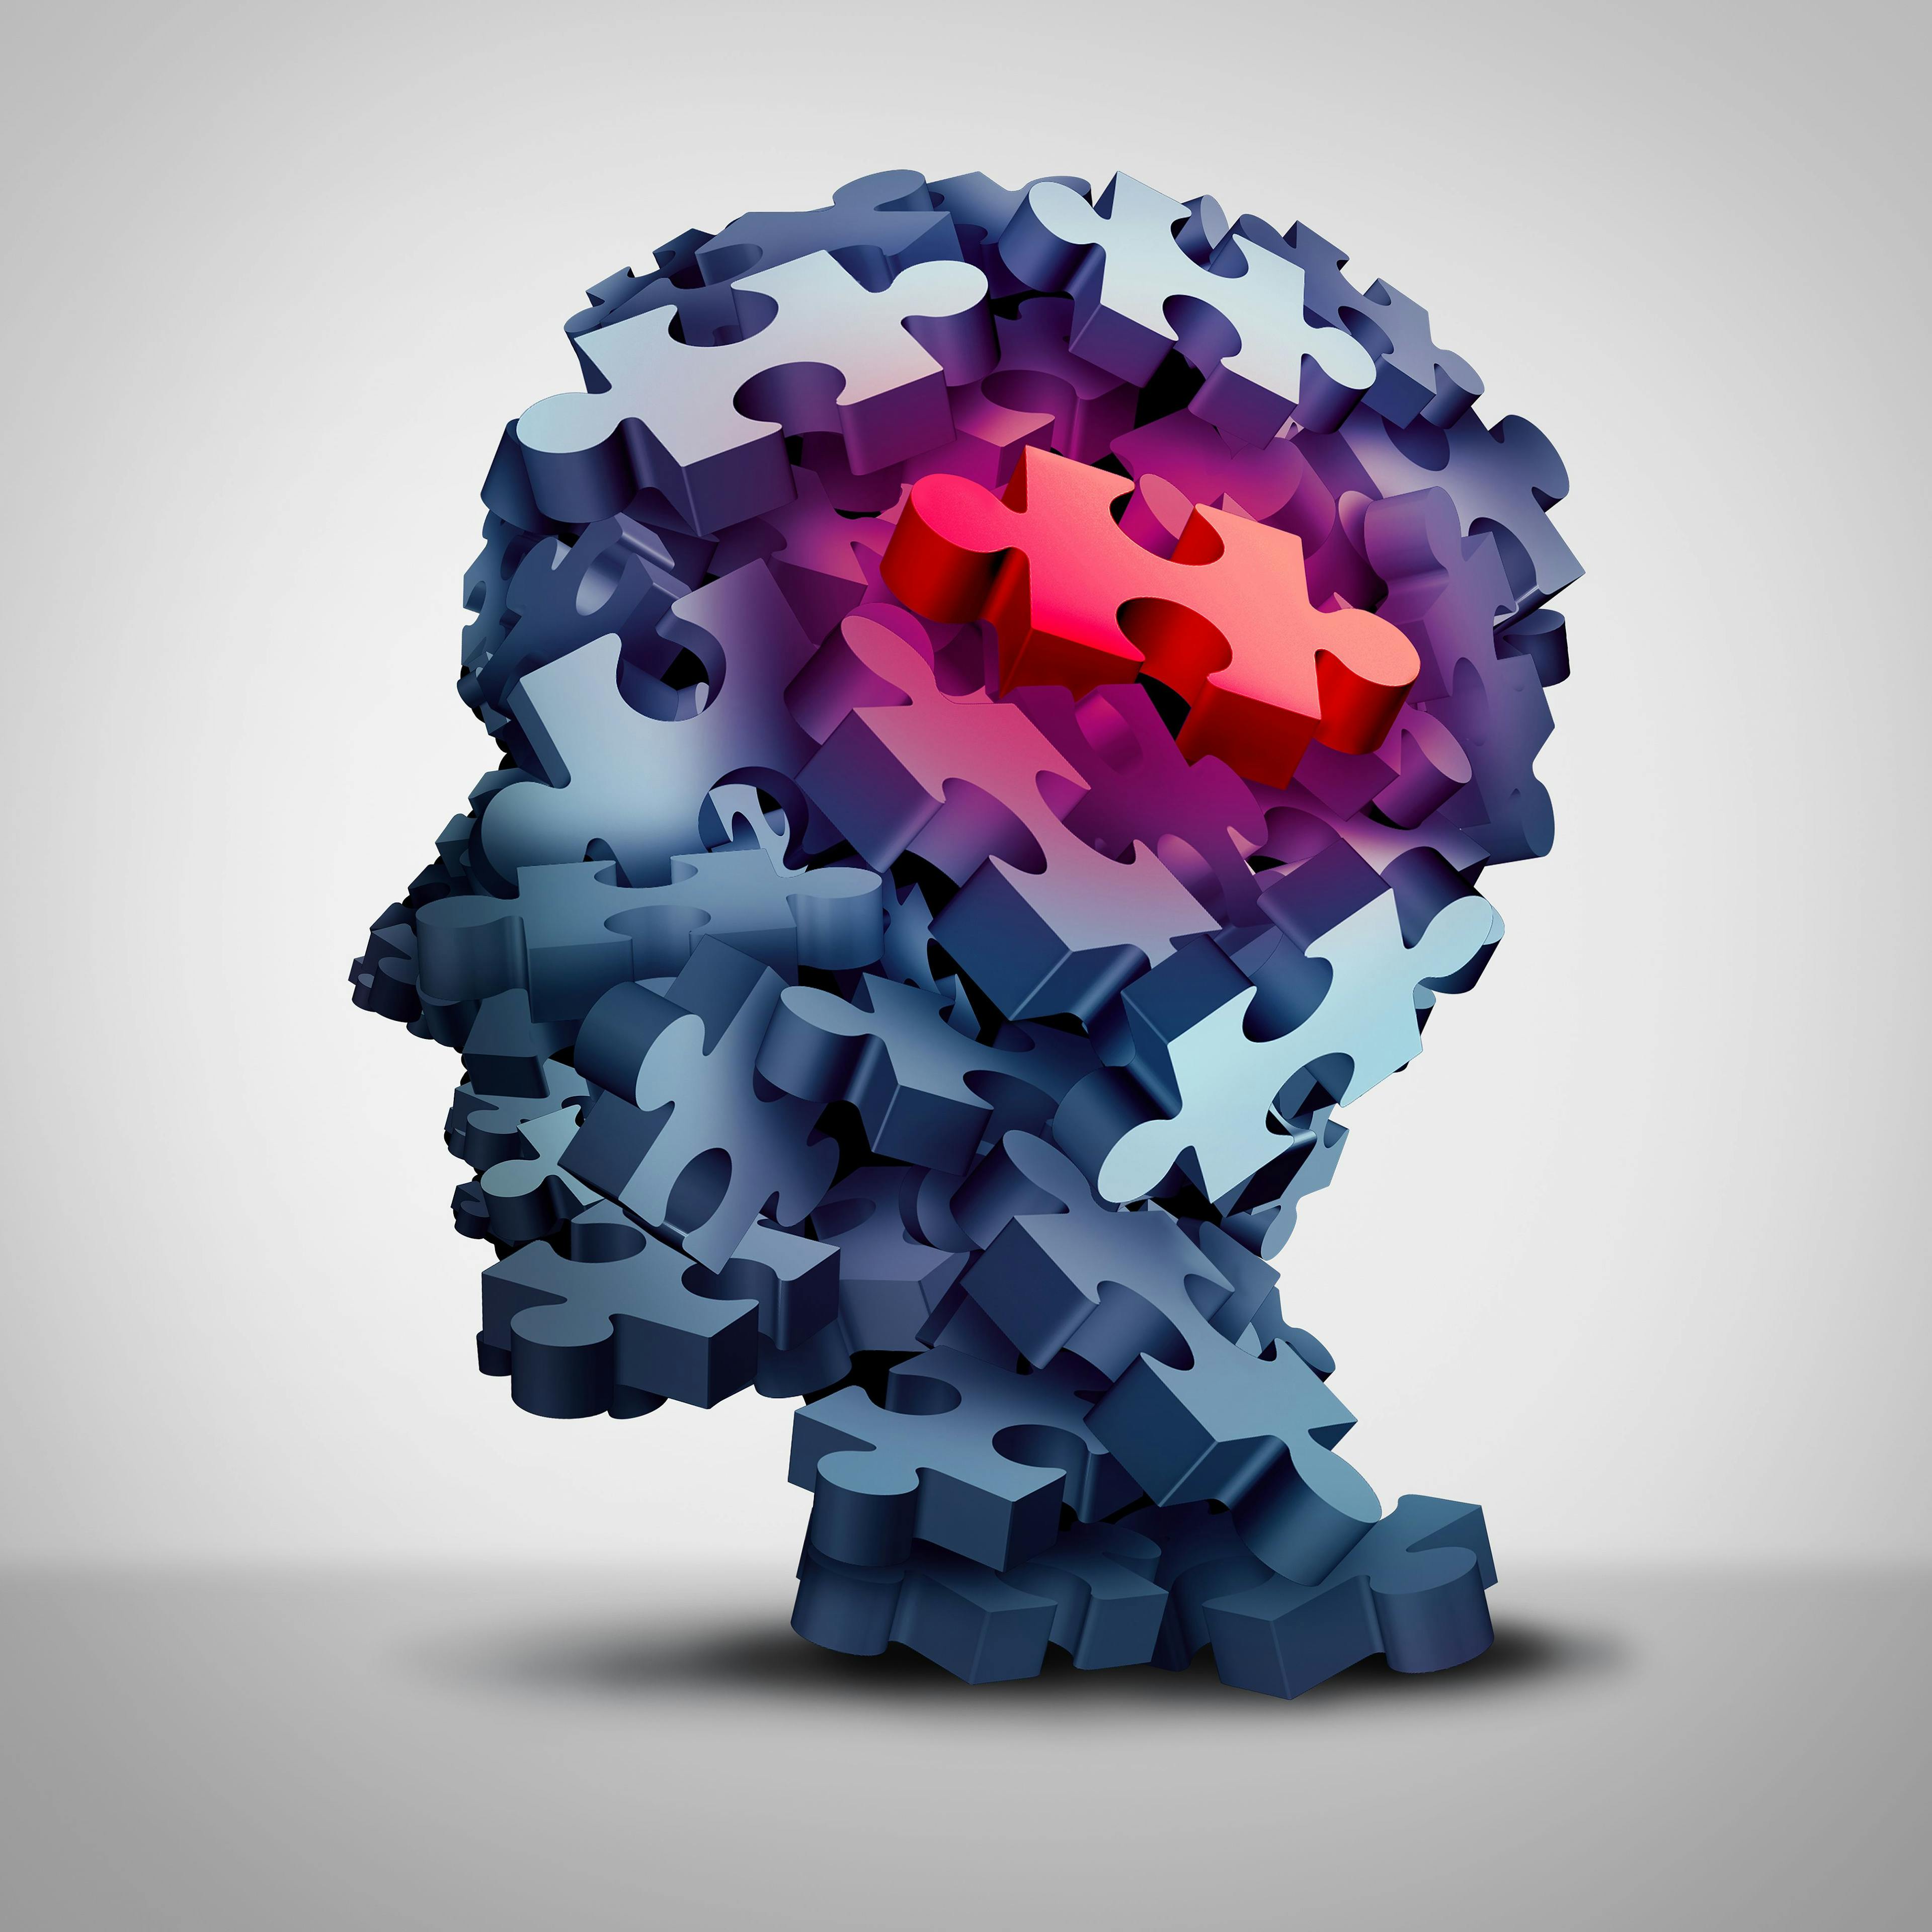 Study: Schizophrenia May Significantly Increase Dementia Risk